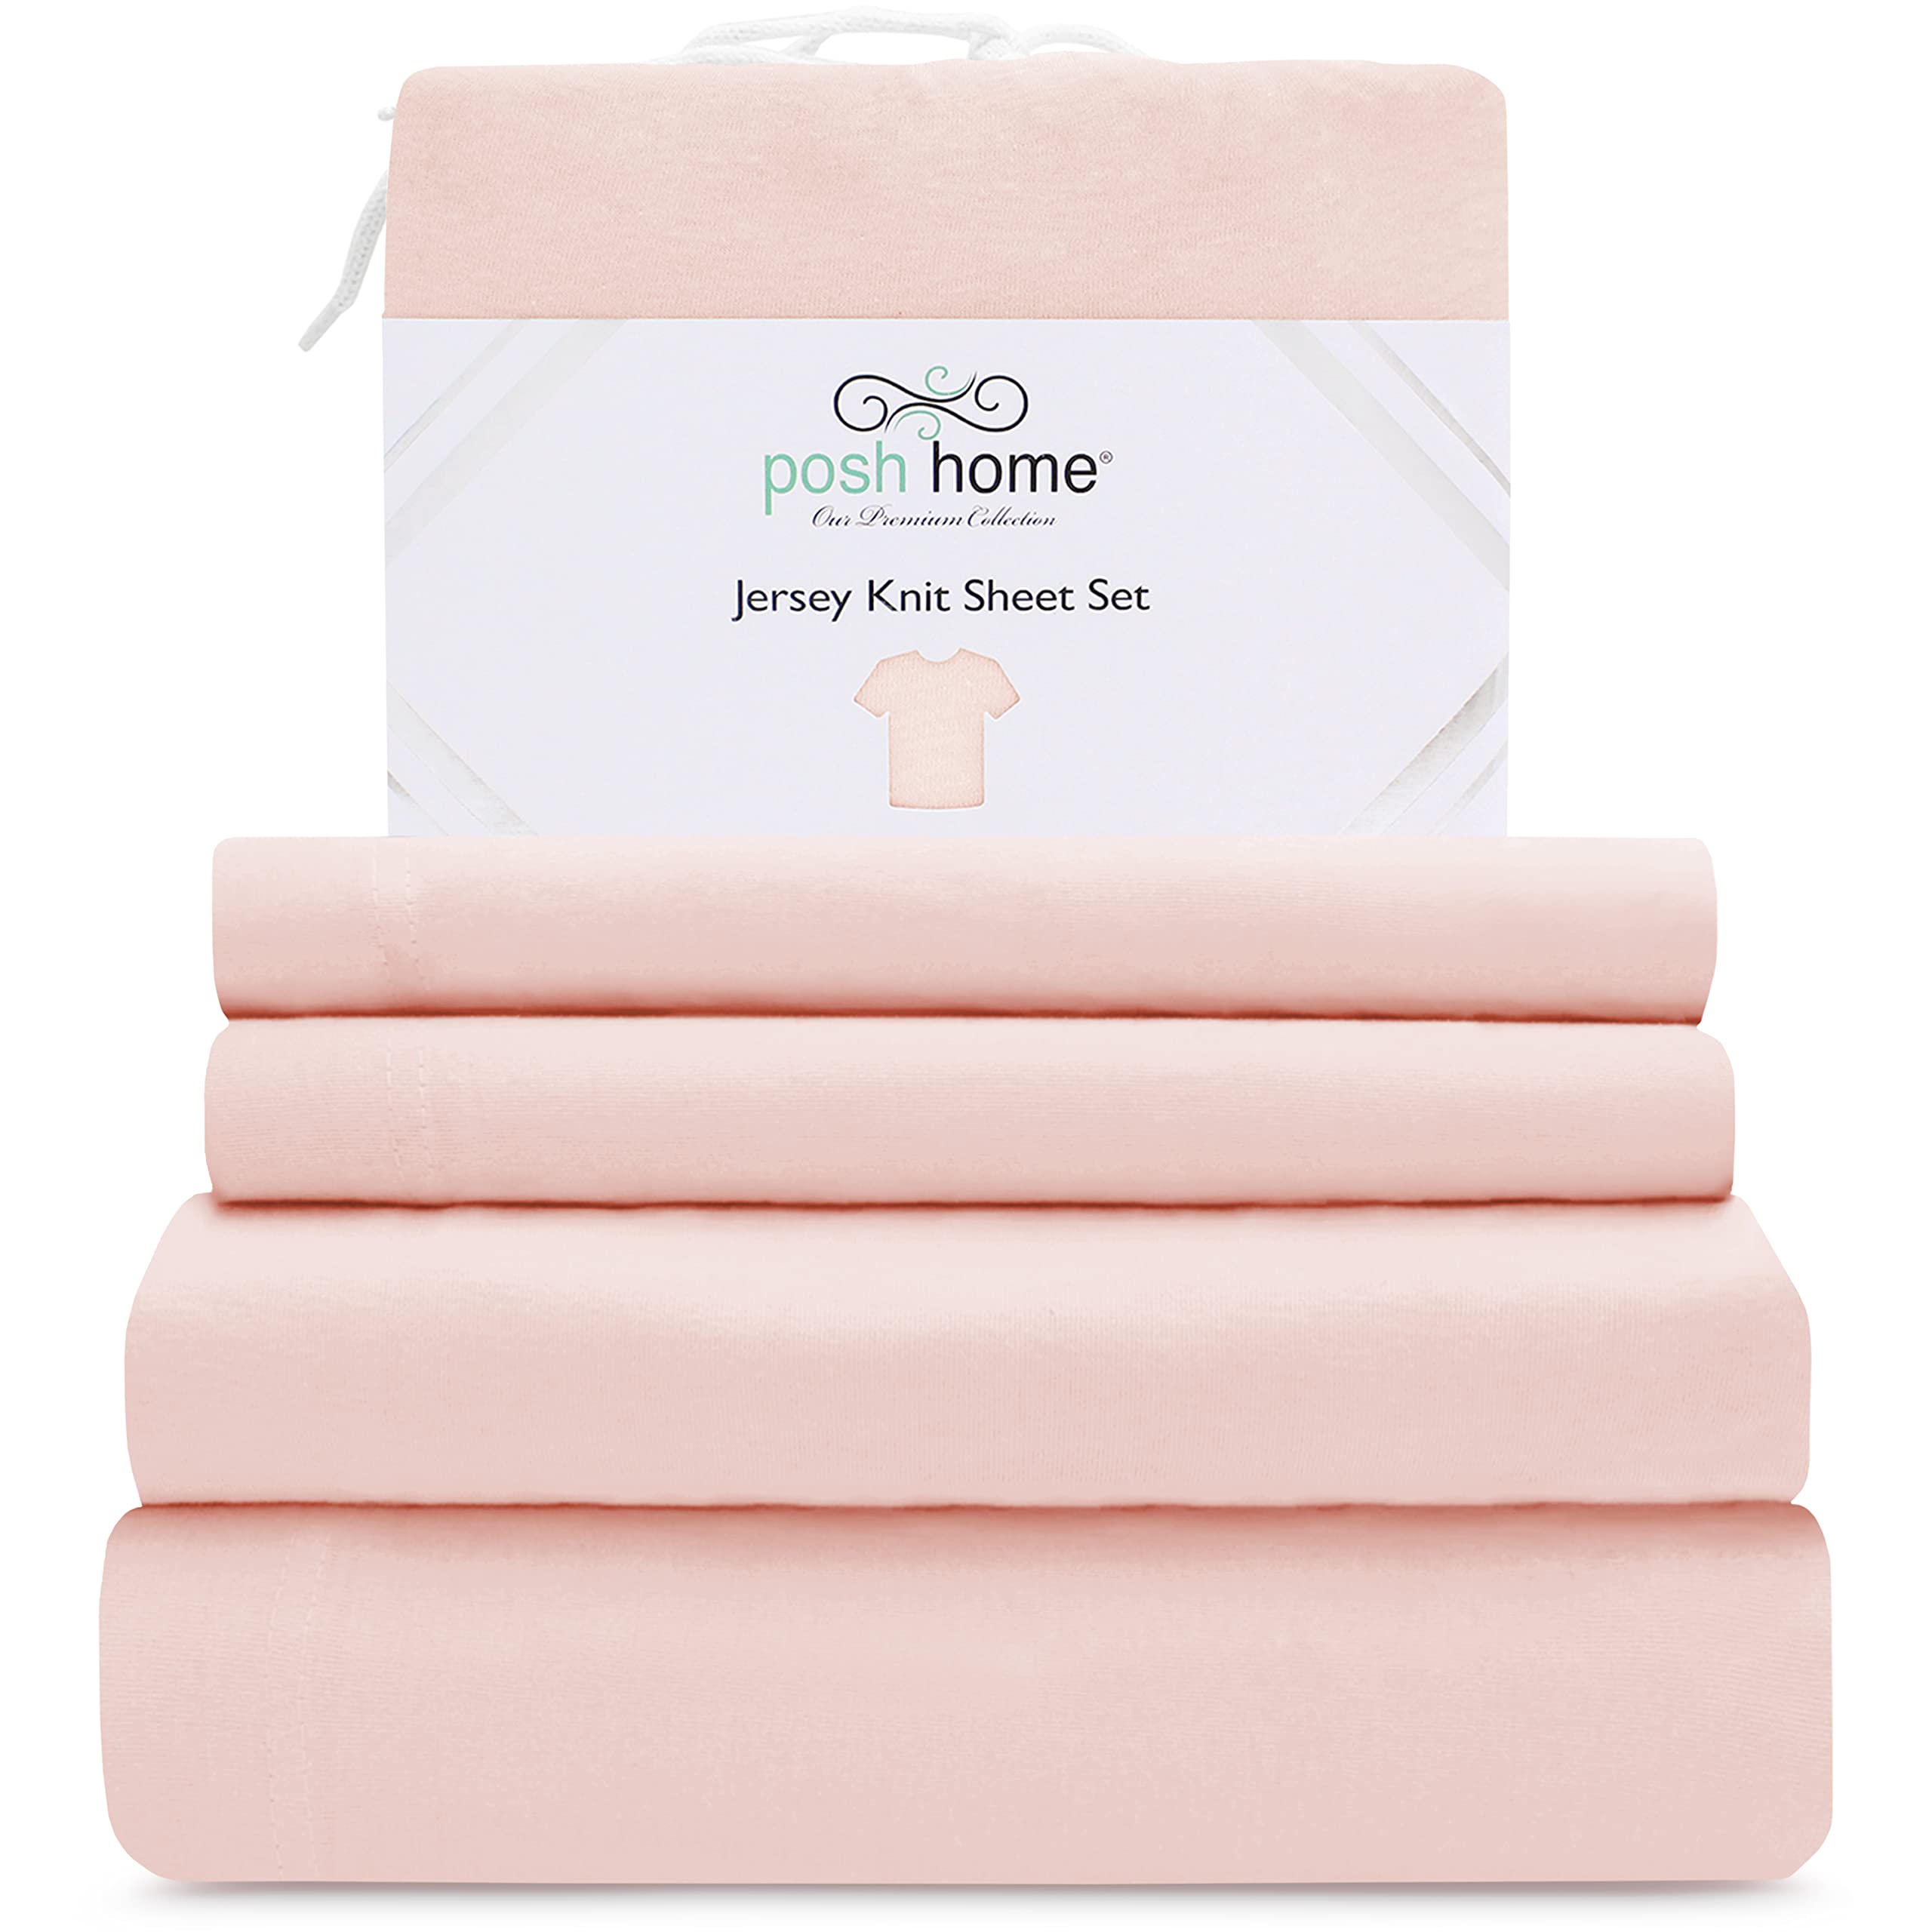 Posh Home Jersey Knit Sheet Set - 4-Piece Jersey Bed Sheets - T-Shirt Breathable & Soft cotton Jersey Sheets - Includes Flat She